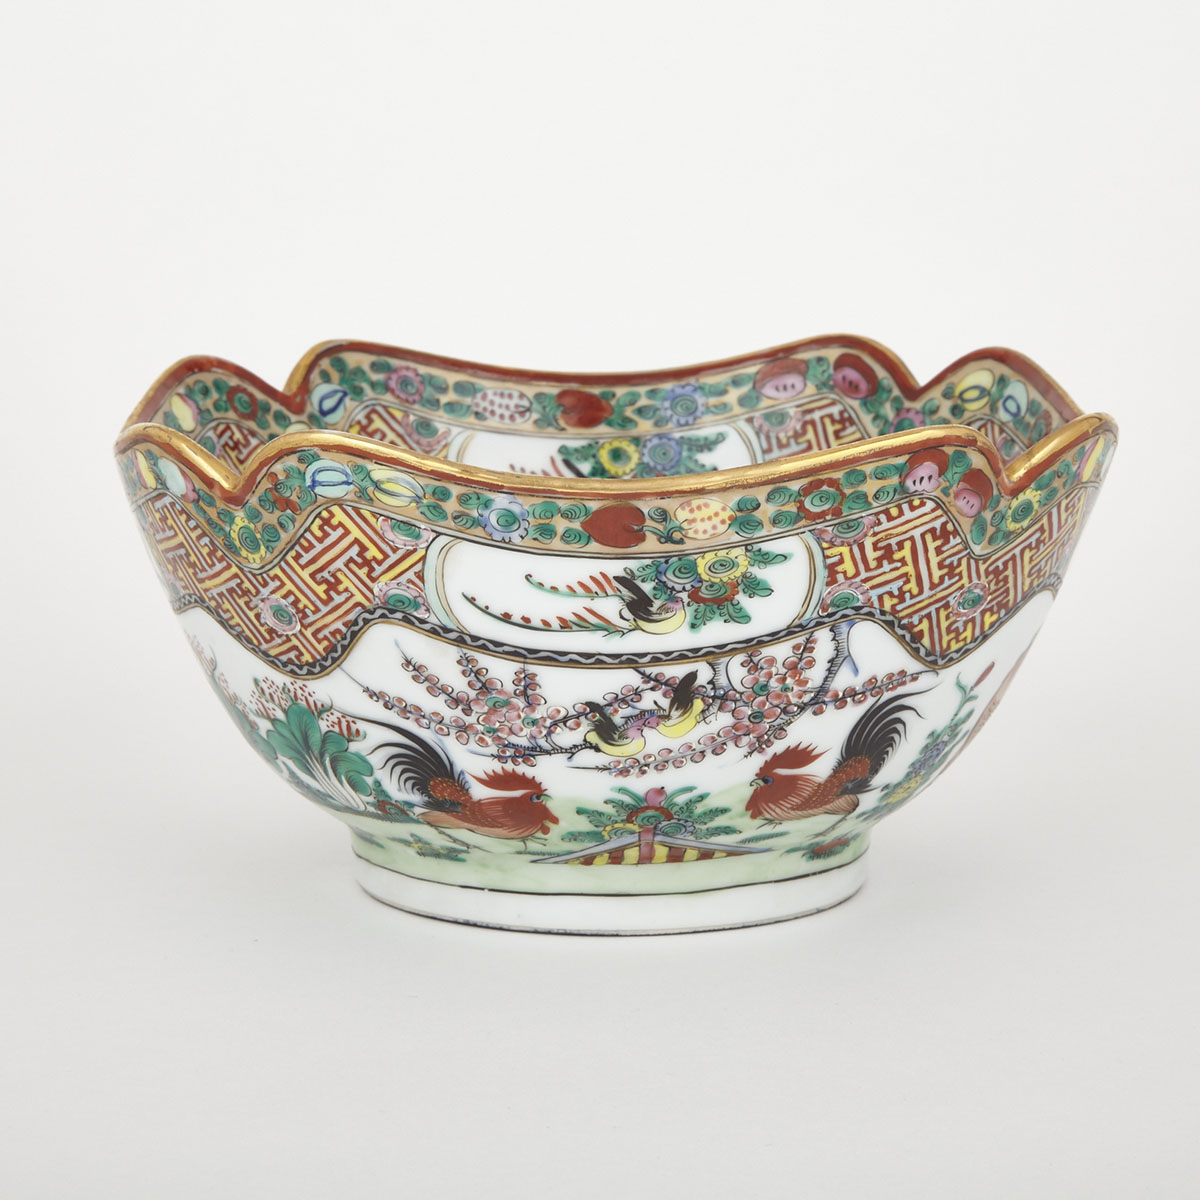 Famille Rose Export Bowl, Early-Mid 20th Century